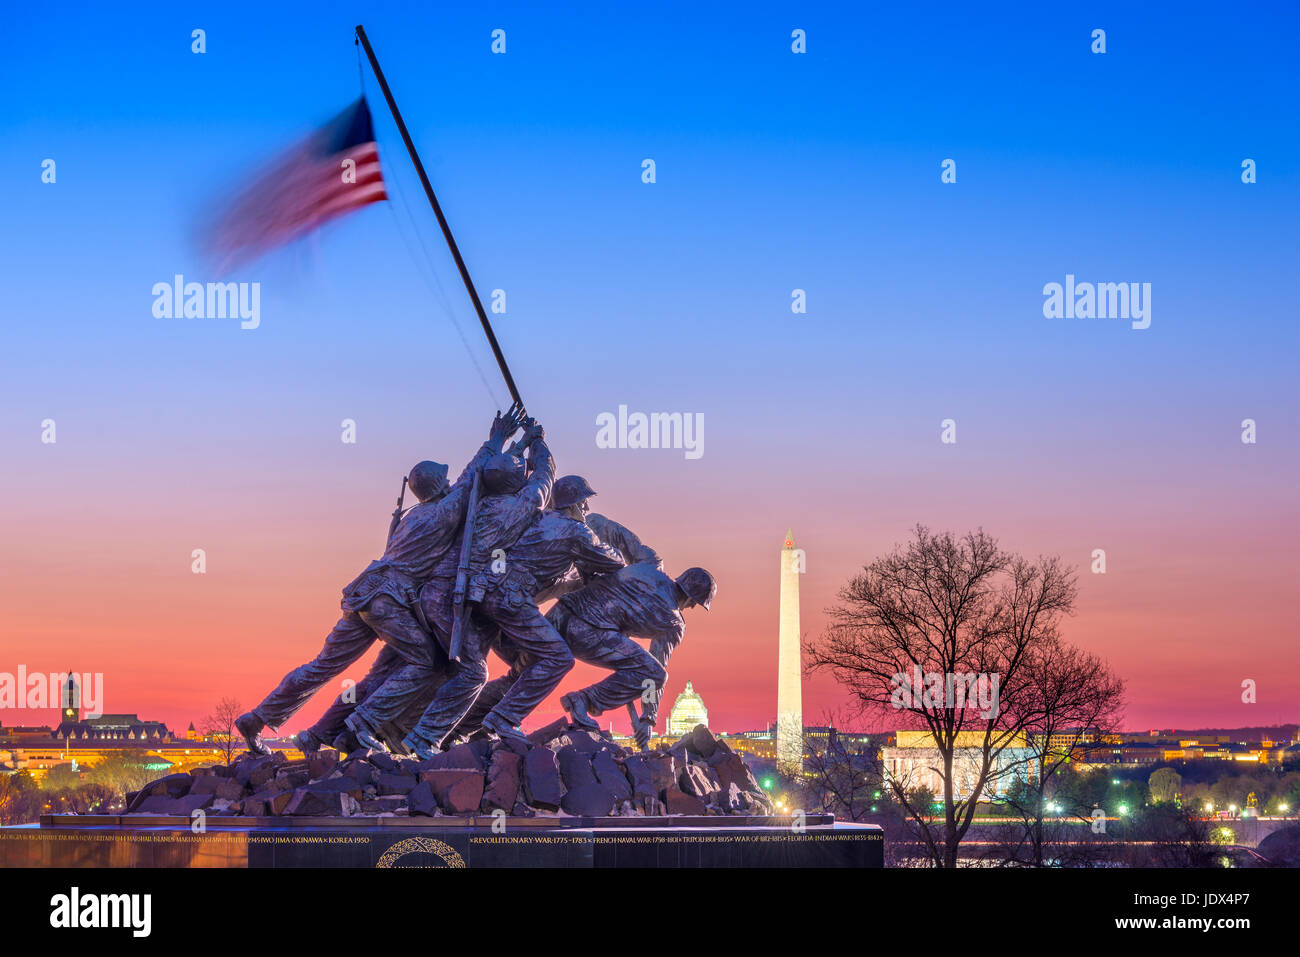 WASHINGTON, DC - APRIL 5, 2015: Marine Corps War Memorial at dawn. The memorial features the statues of servicemen who raised the second U.S. flag on  Stock Photo